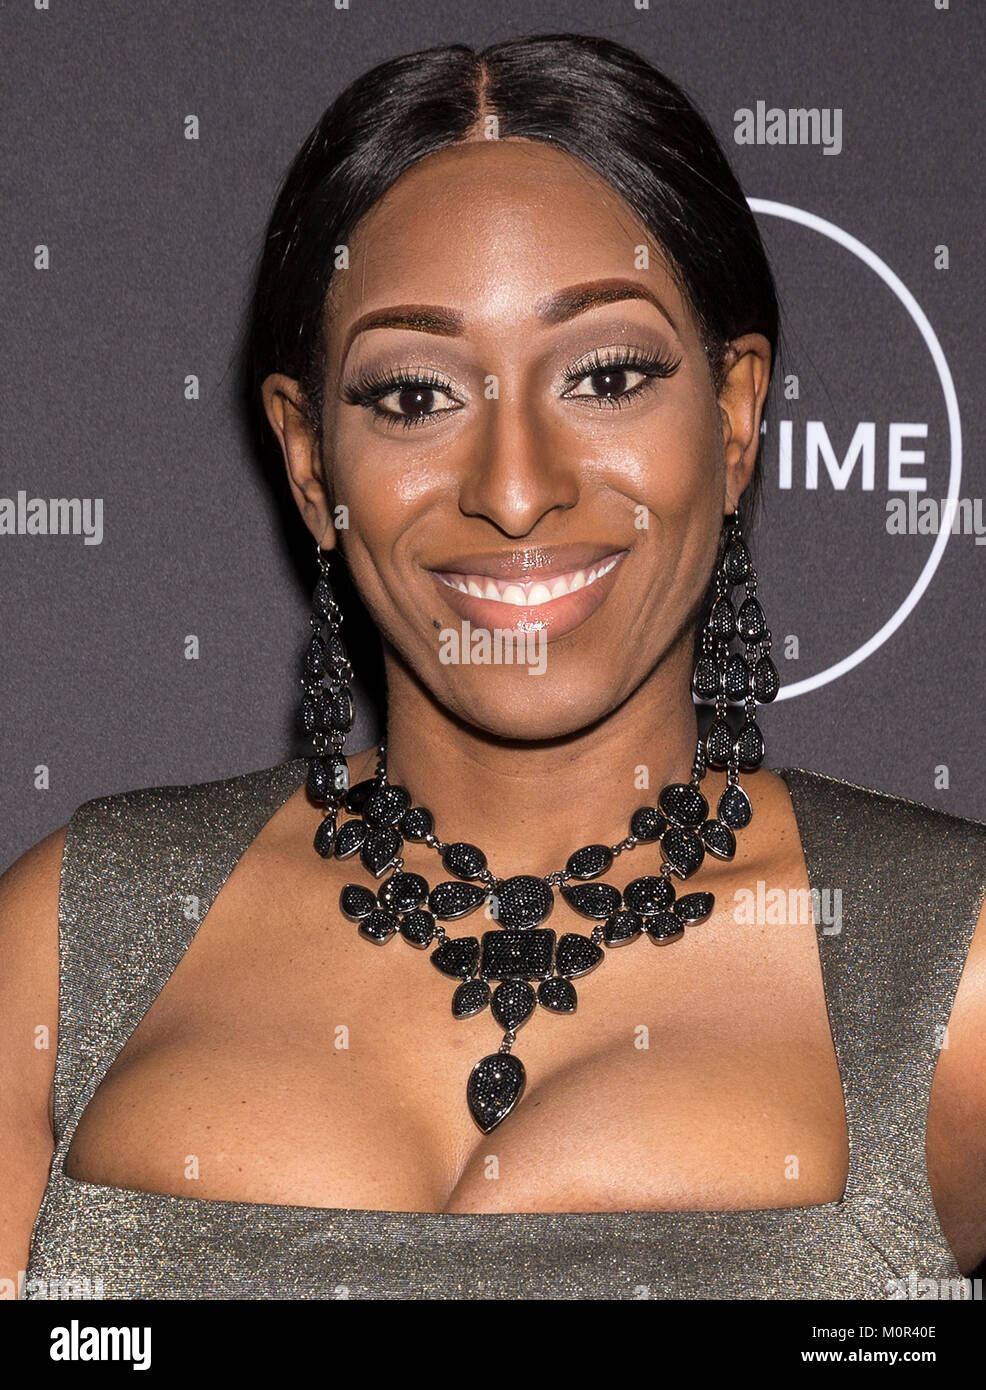 New York City, USA. 23rd Jan, 2018. New York, NY - January 23, 2018: Kendra McCray attends Lifetime's Film, 'Faith Under Fire: The Antoinette Tuff Story' red carpet screening and premiere event at NeueHouse Madison Square Credit: Ovidiu Hrubaru/Alamy Live News Stock Photo